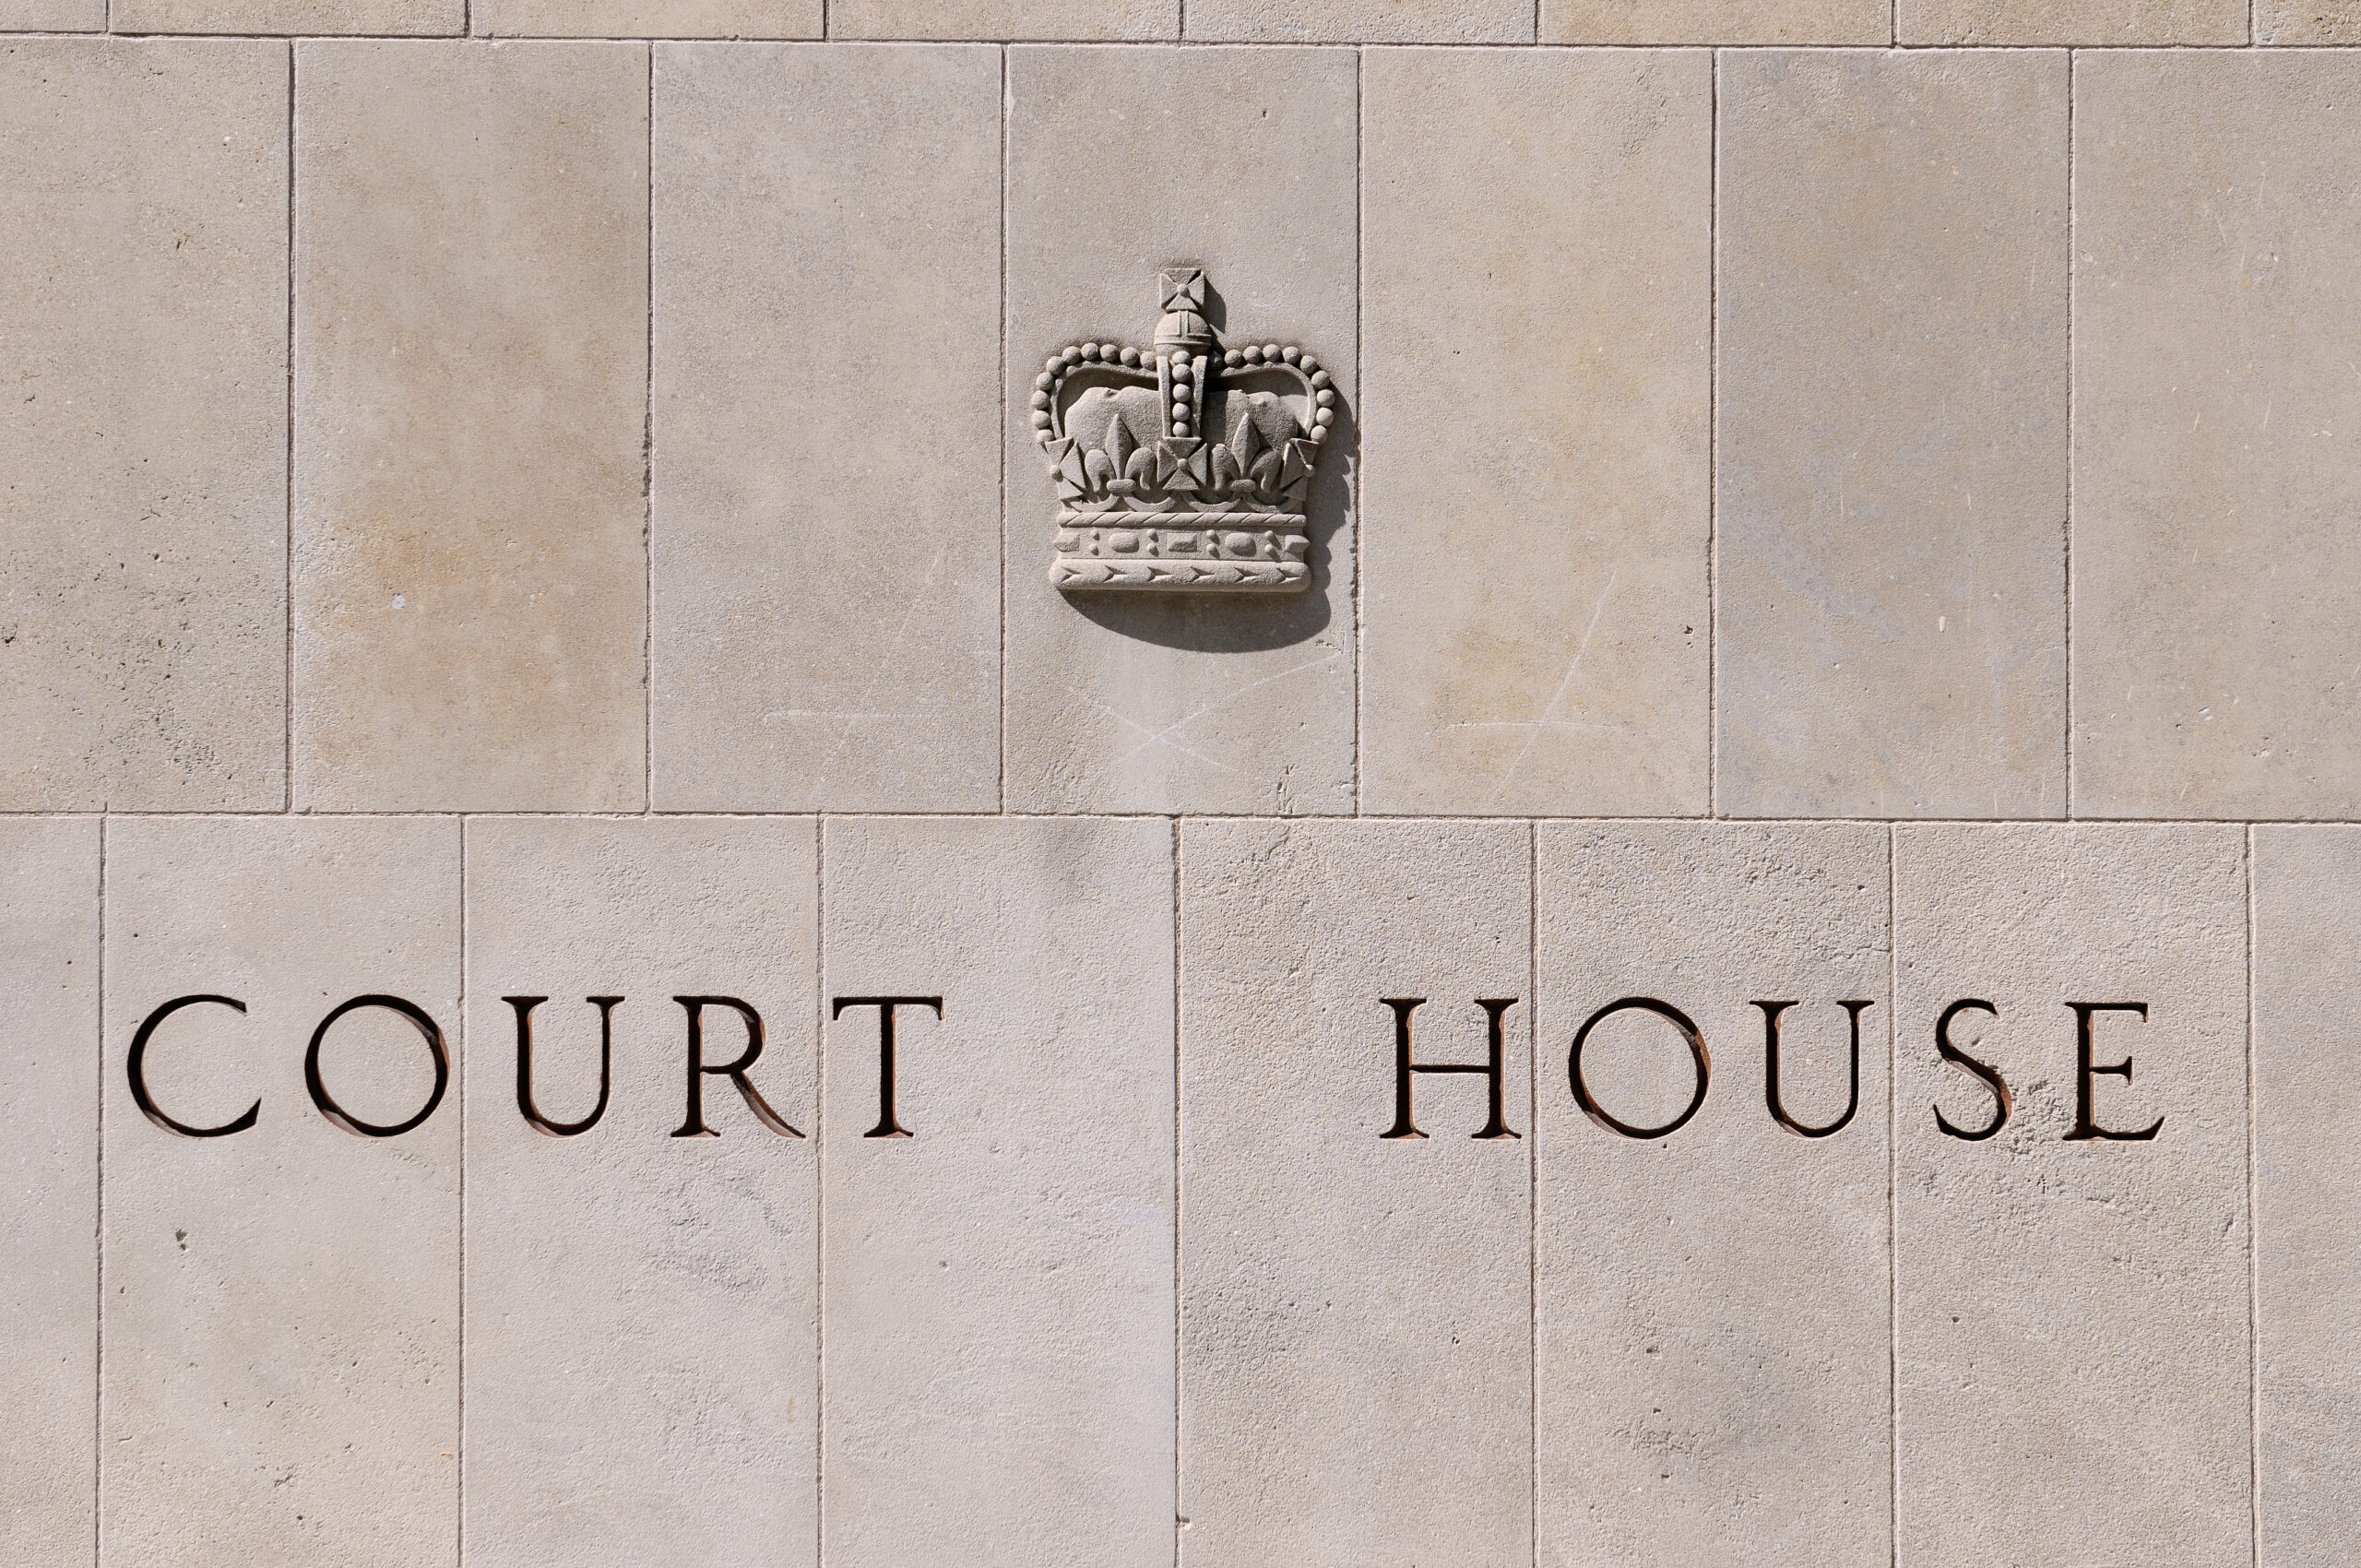 Court house carved on stone blocks with royal emblem